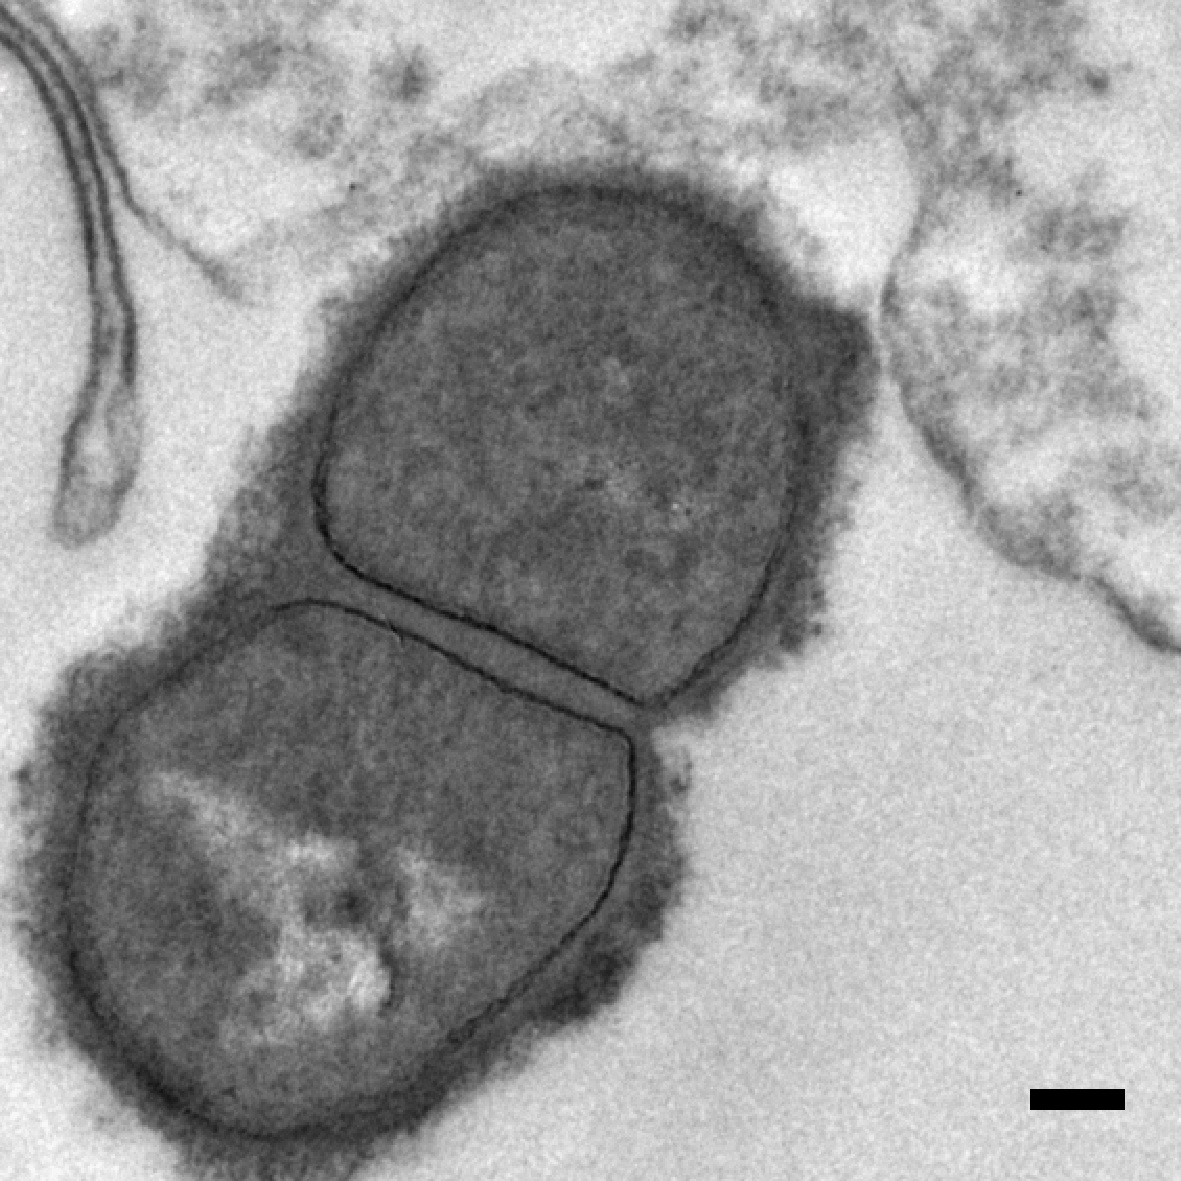 B/w electron microscope image of a Lactobacillus rhamnosus bacterium that is in contact with a keratinocyte (measuring bar = 0.1).